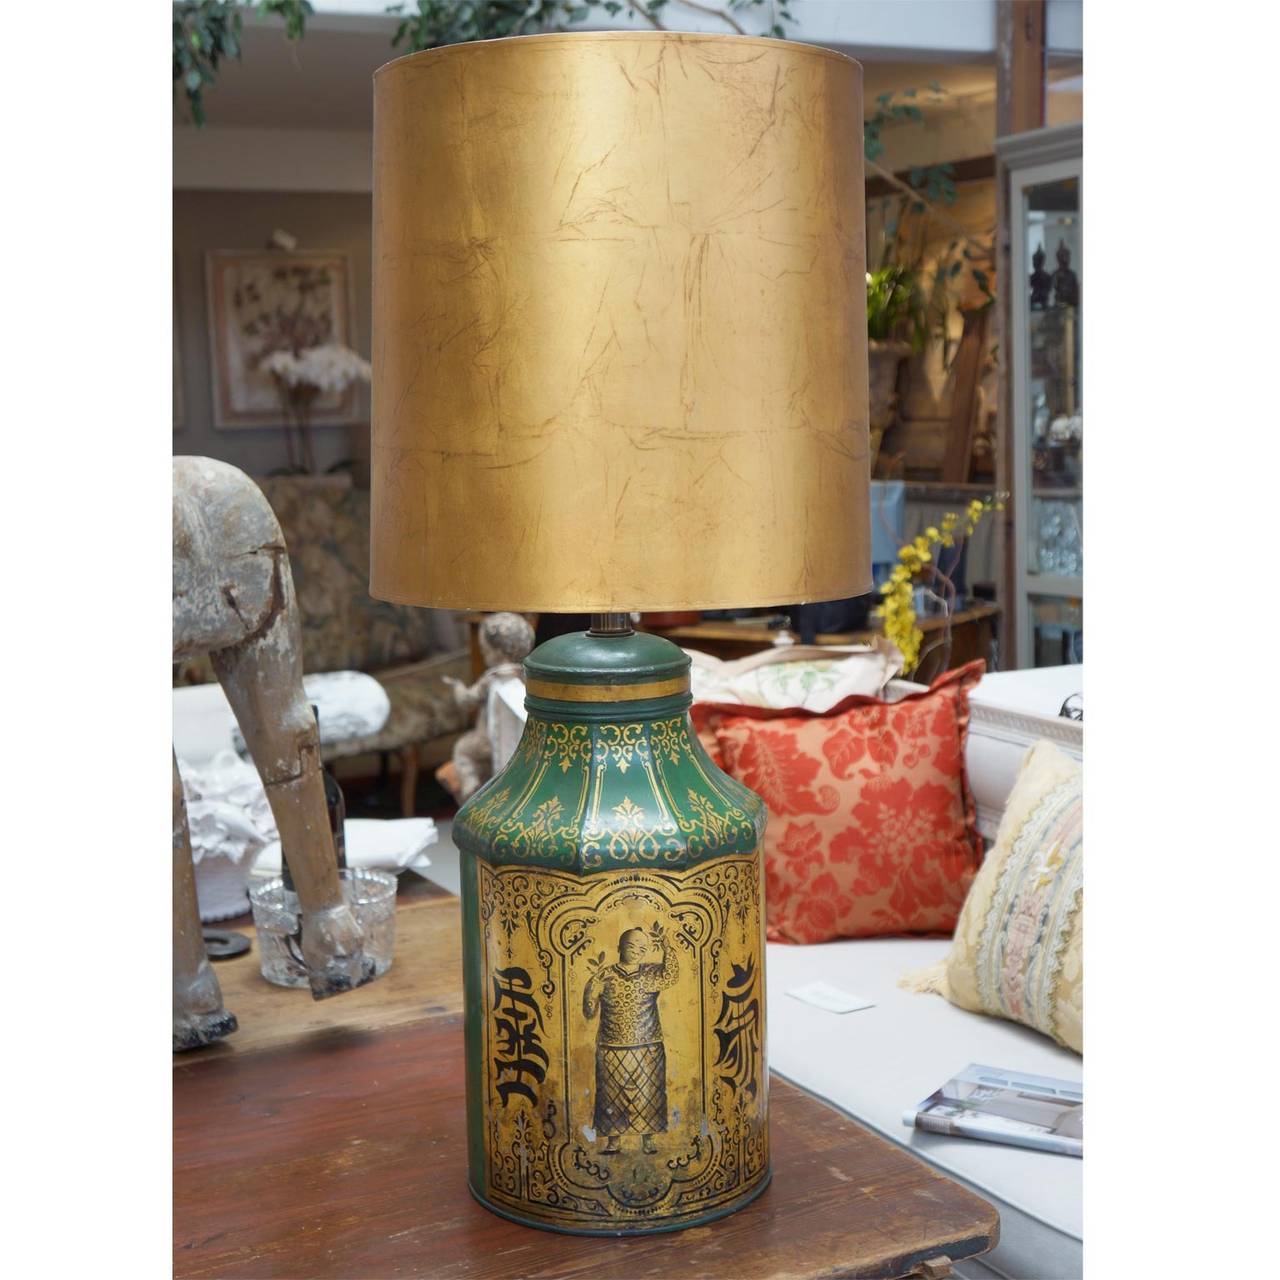 Tôle Mid-19th Century English Tea Canister Lamps Decorated in Chinoiserie Style